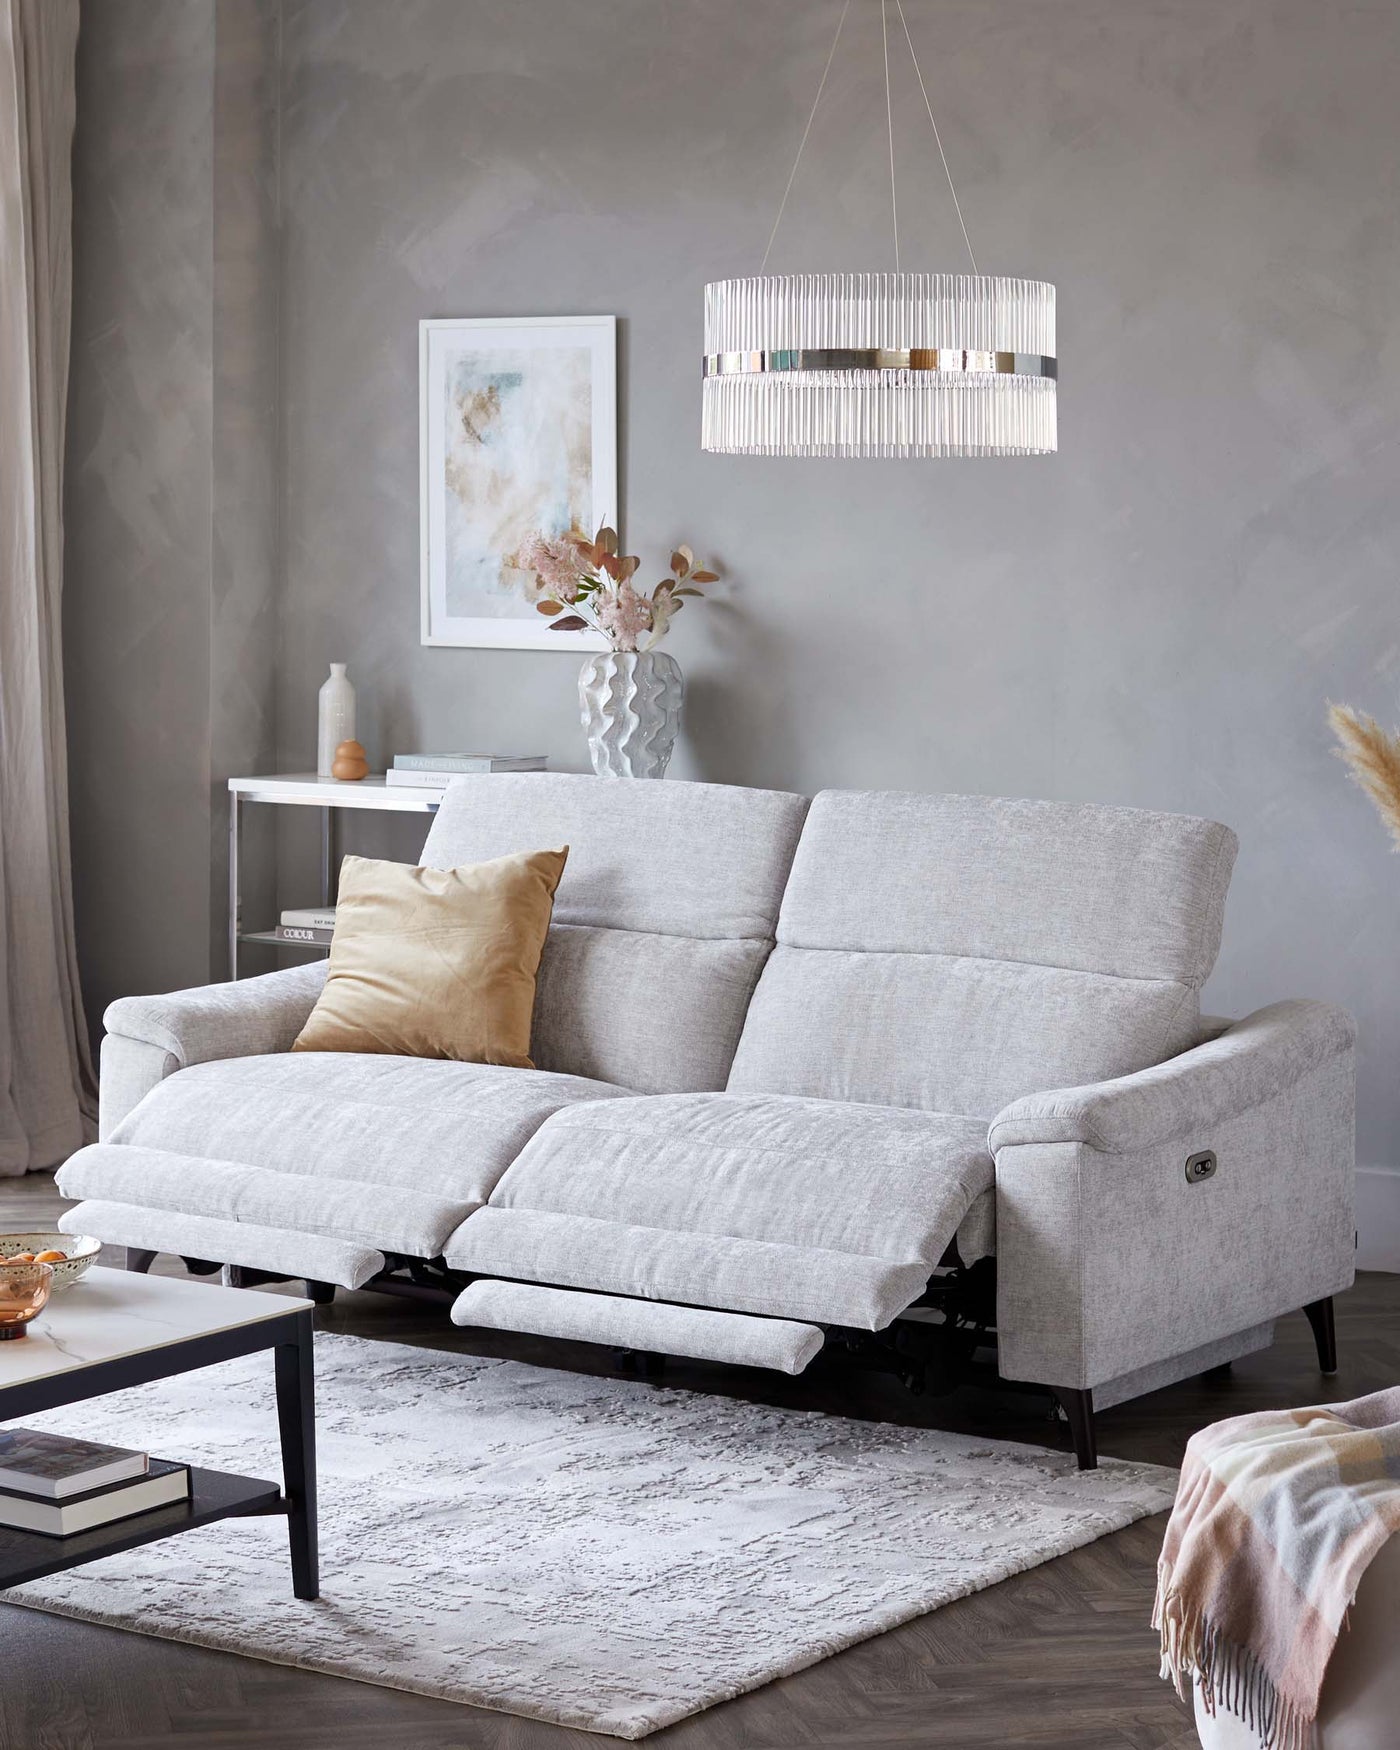 A contemporary light grey fabric reclining sofa with a tufted backrest and two extended footrests, complemented by a sleek black metal-framed coffee table with a white top, set upon a textured white and grey area rug.